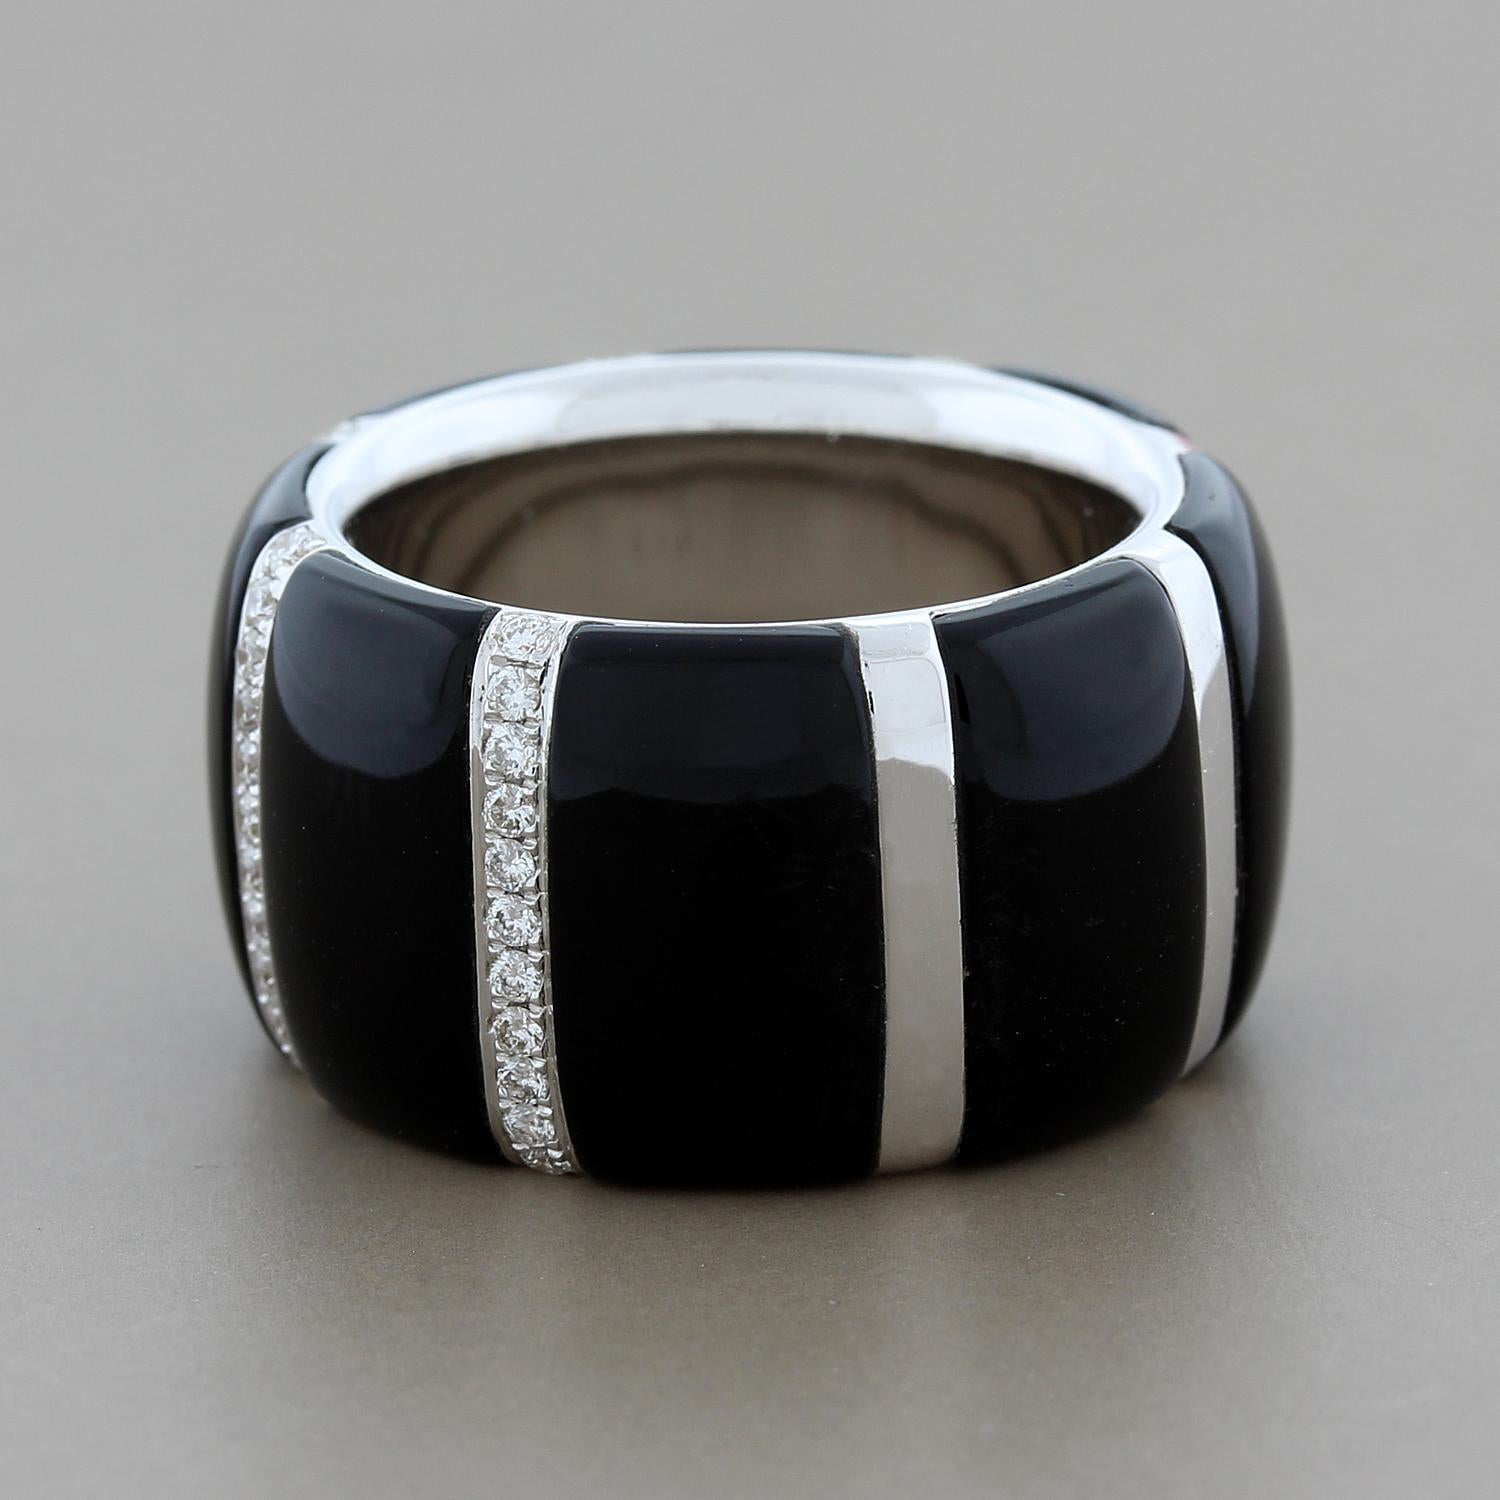 This stunningly chic band features smooth black onyx segmented by 0.43 carats of white round cut diamonds set in 18K white gold. This piece can easily be worn any time of day.  

Currently ring size 6.50
Band Width: 0.50 inches